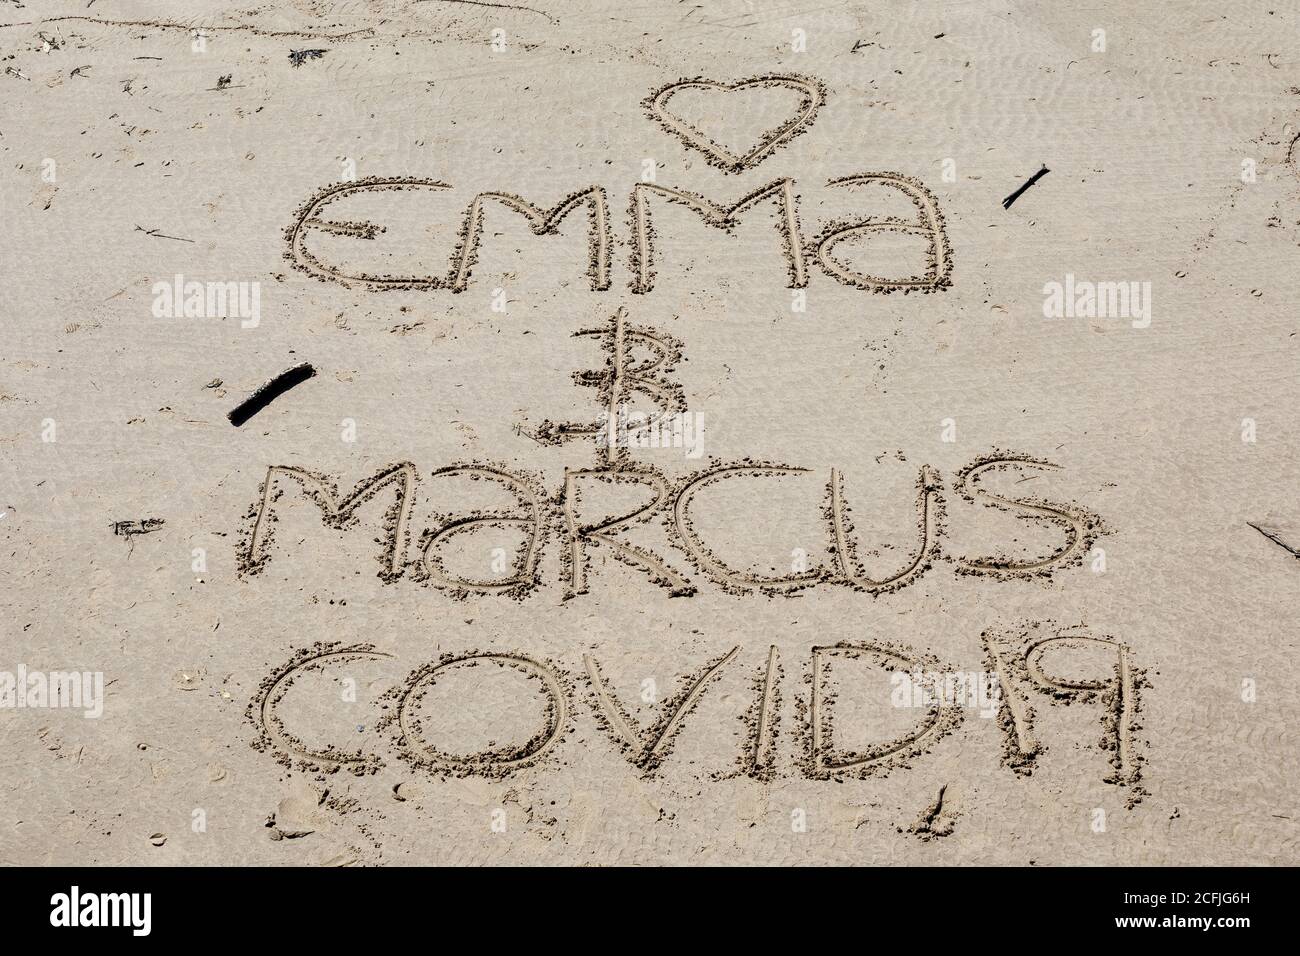 Writing in sand on the beach at Whitby, England, during the 2020 Coronavirus pandemic. Stock Photo